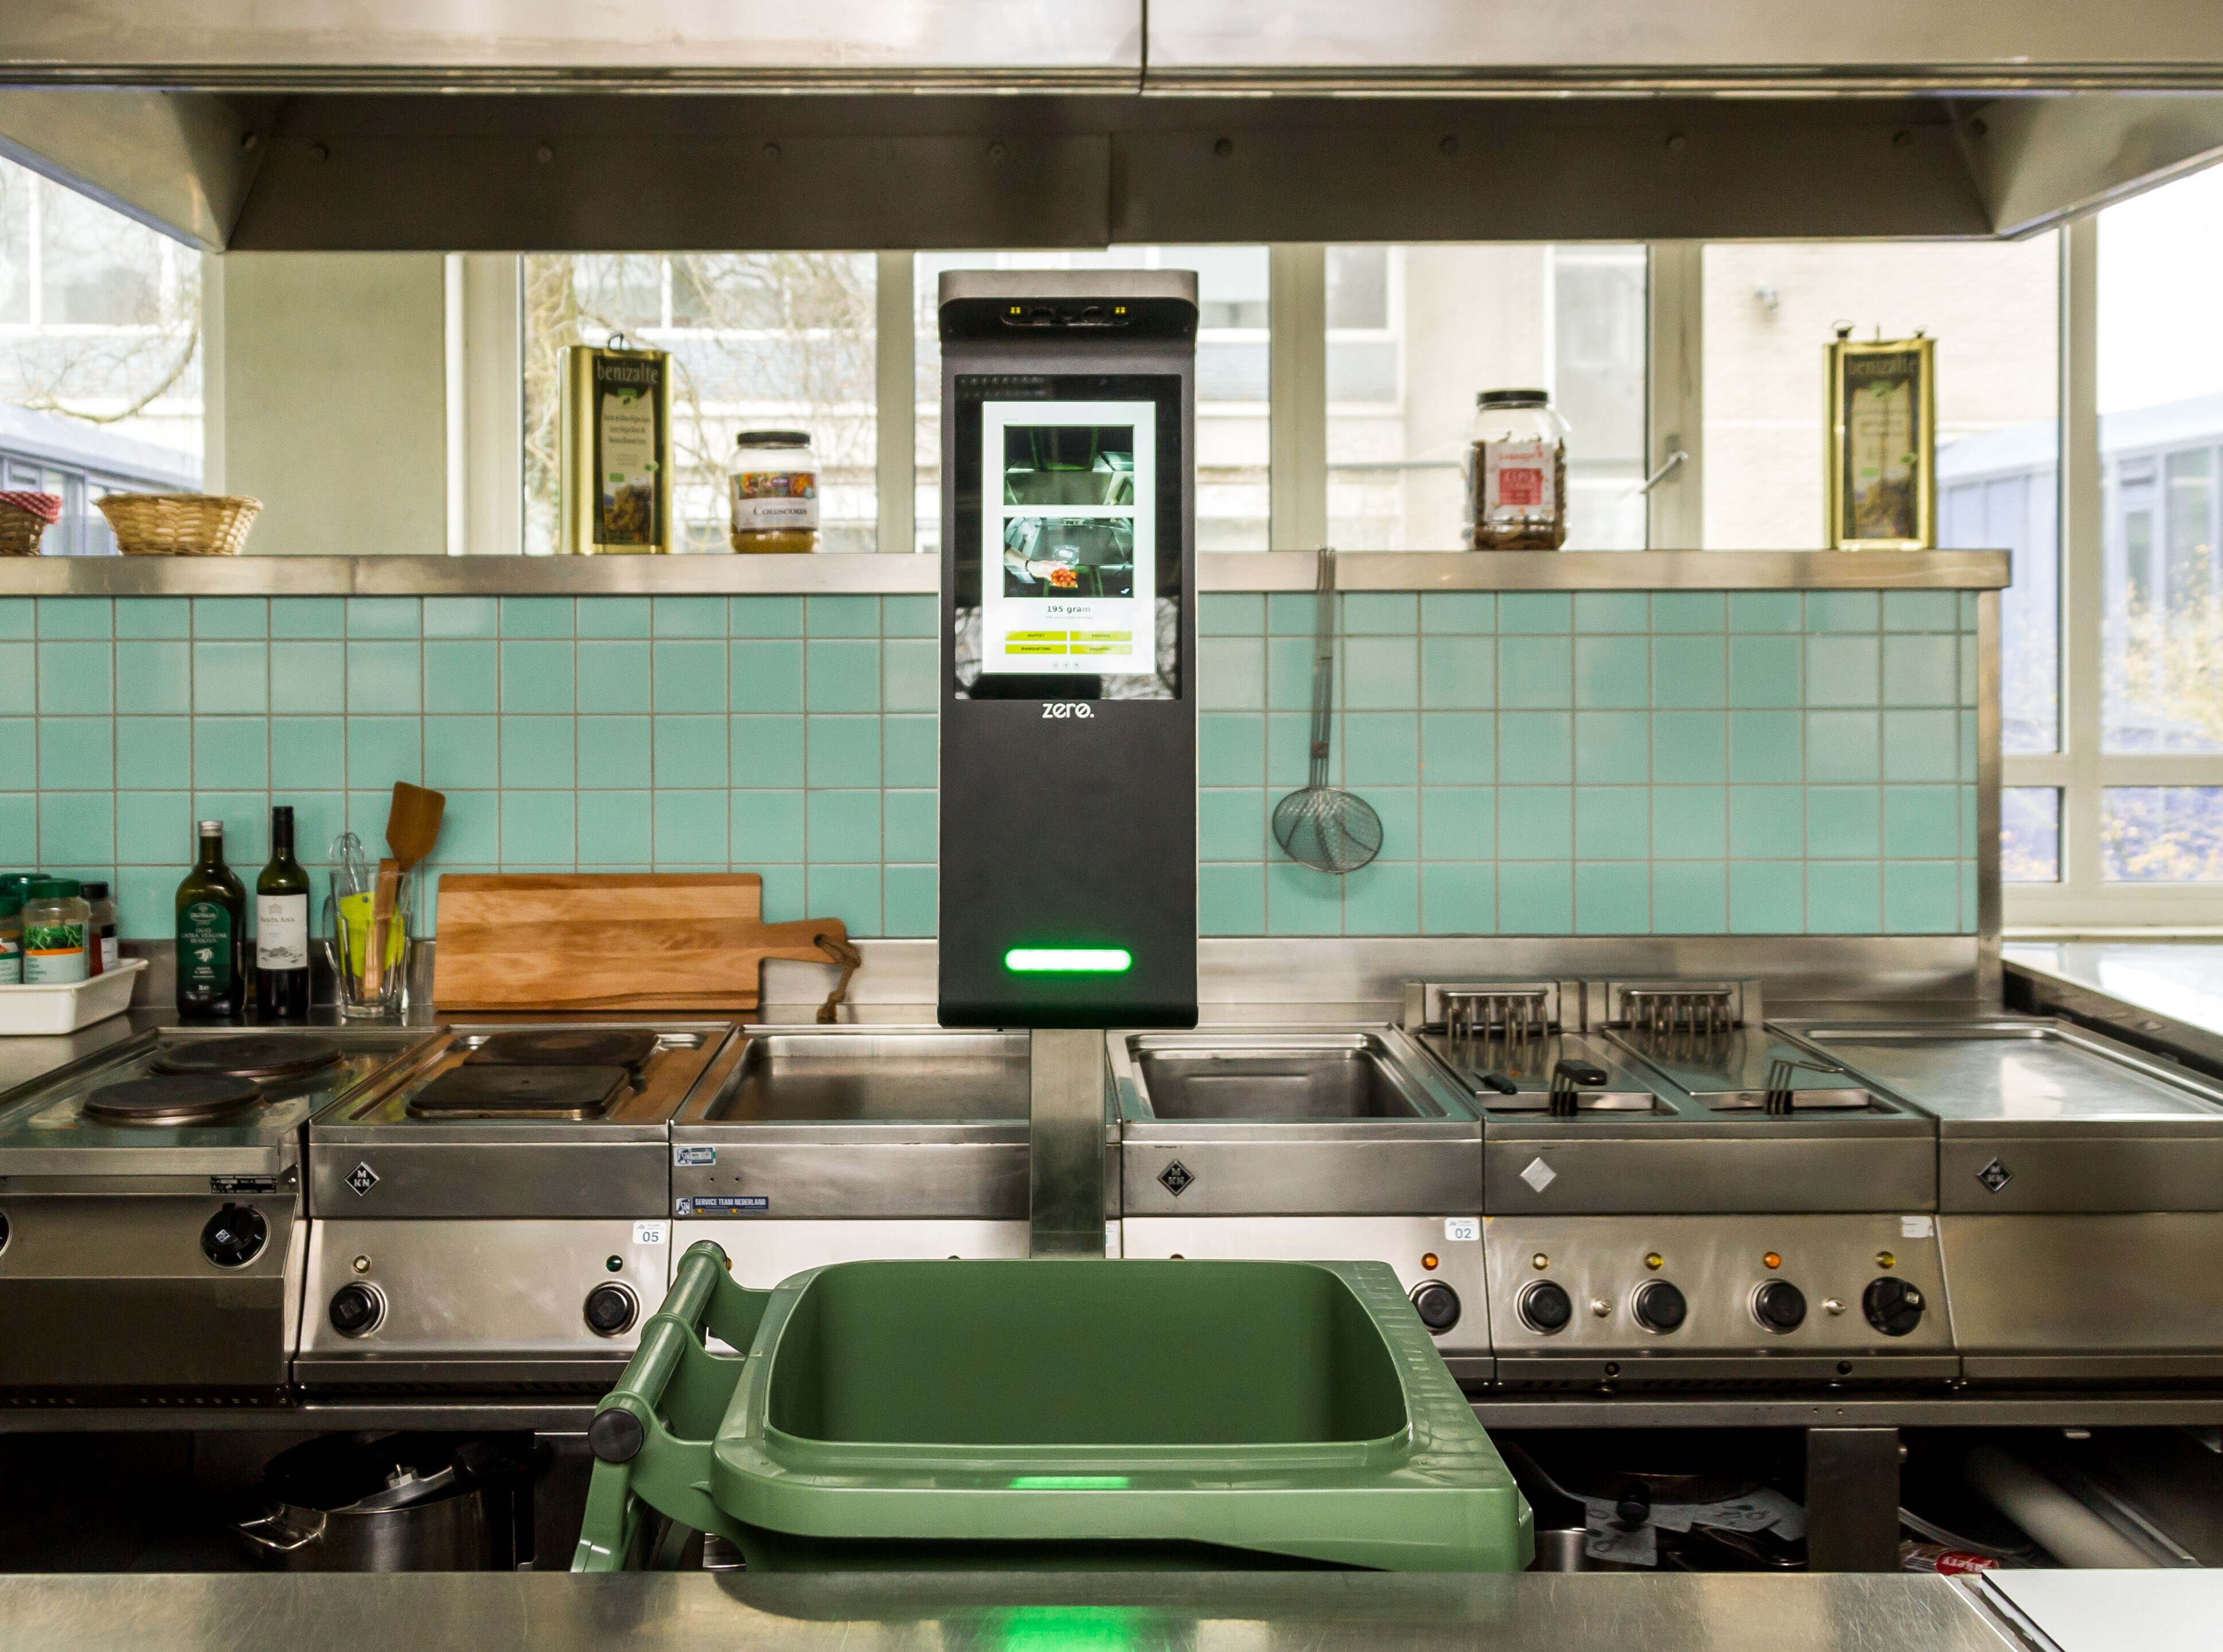 Orbisk: Monitors and reduces food waste in professional kitchens by employing progressive AI technology that improves sustainability and profitability